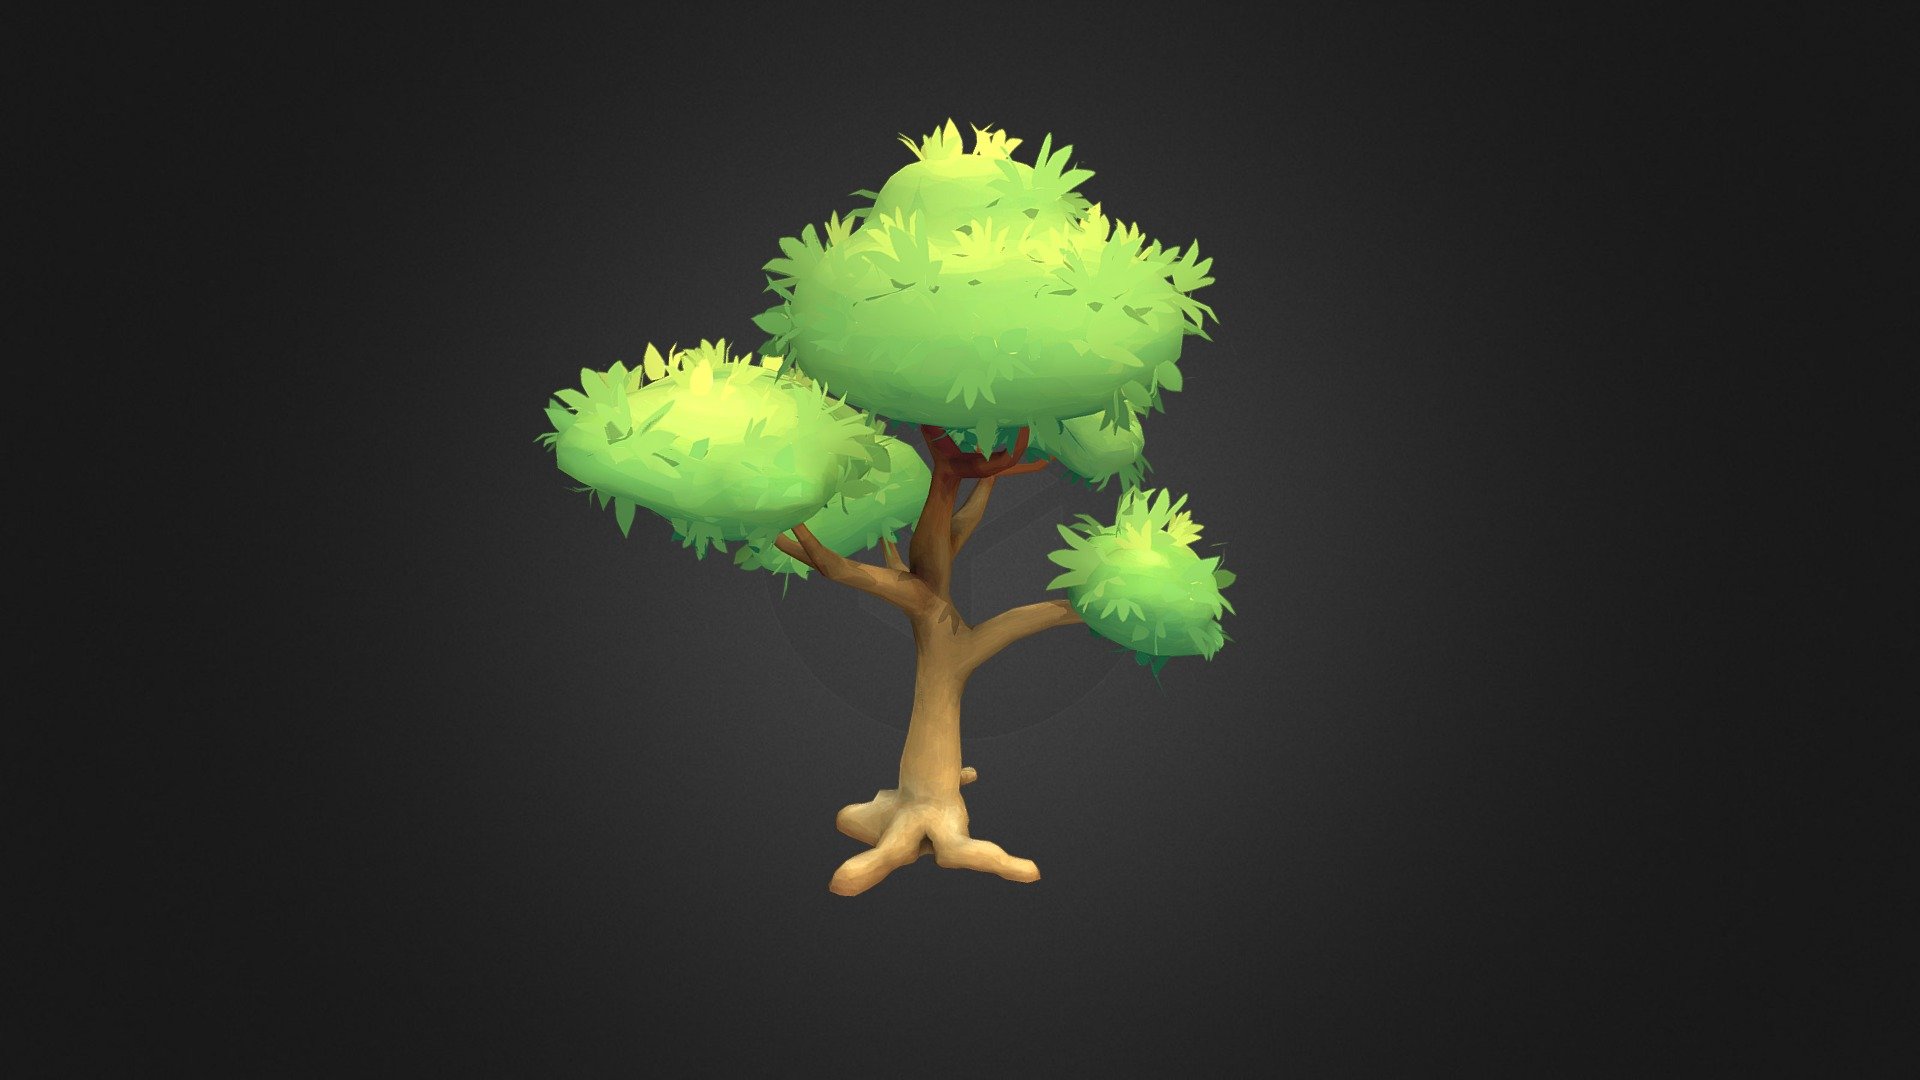 You can see the promotional video for this piece here, fully animated with shaders and all!
https://www.youtube.com/watch?v=4OqZ7ujv-vQ - Hand-Painted Fantasy Tree - Video Available! - 3D model by Graham (@graham3d) 3d model